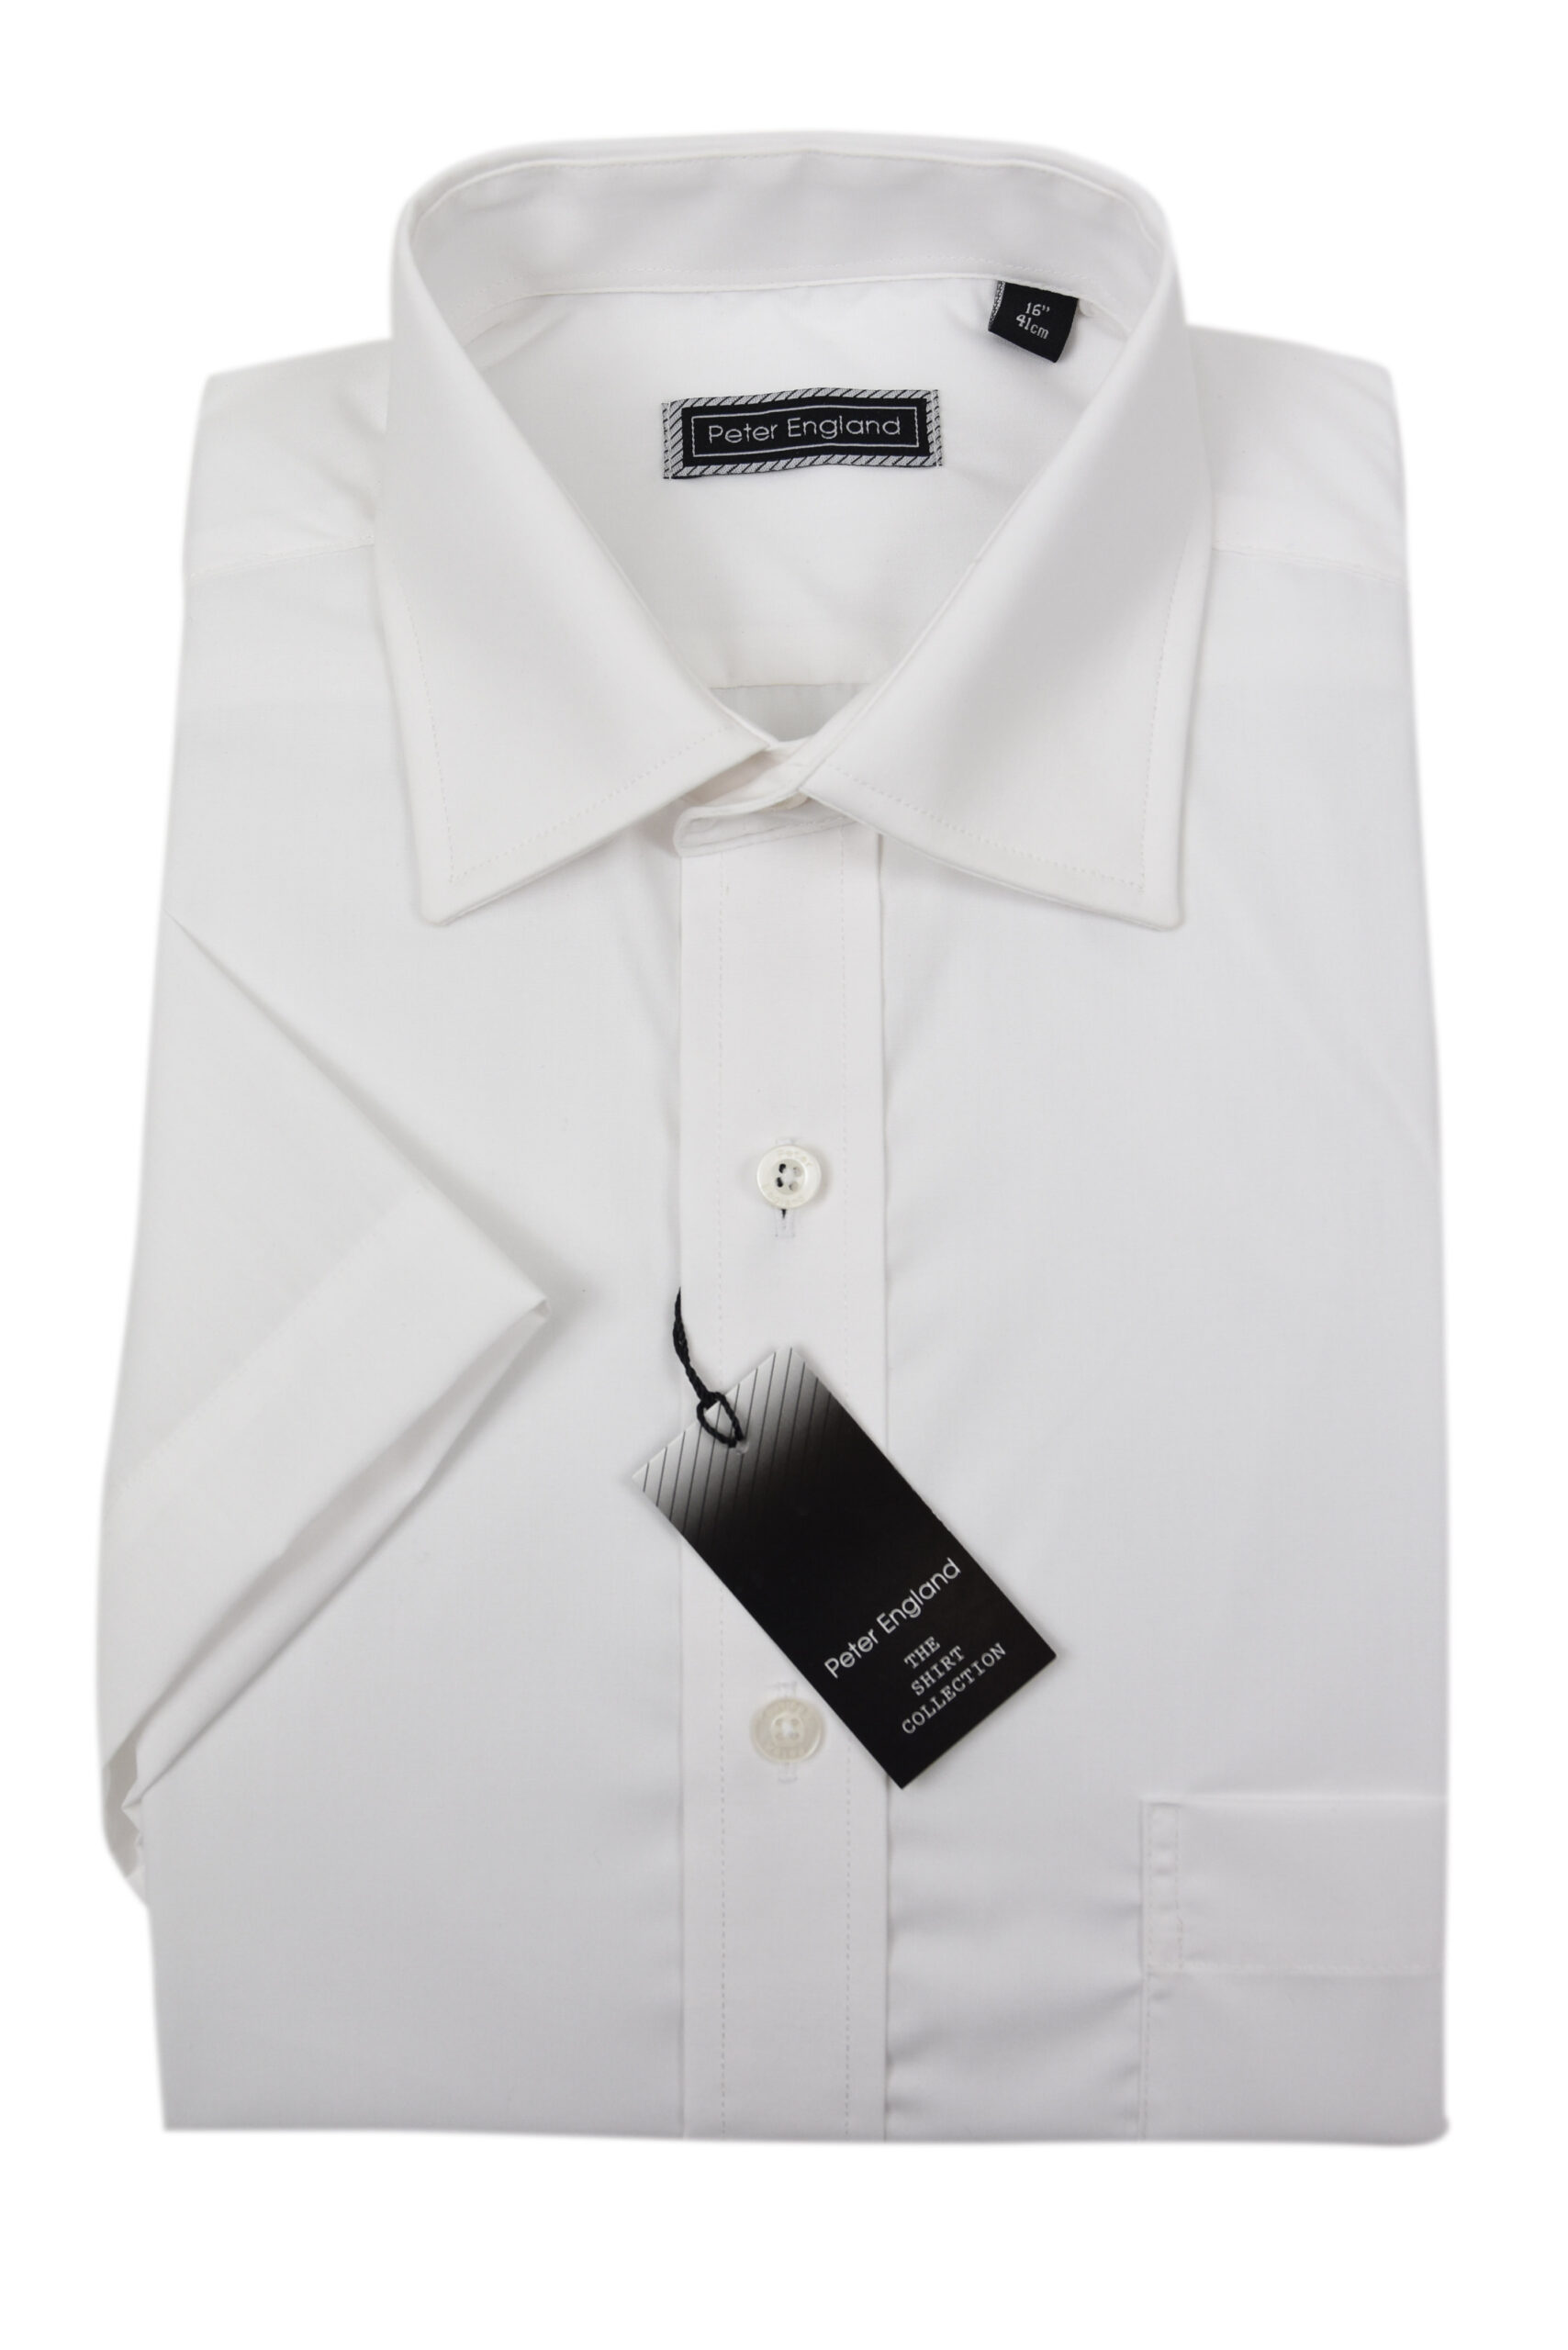 PETER ENGLAND PLAIN WHITE HALF SLEEVED SHIRT – CLASSIC FIT - Cain of ...